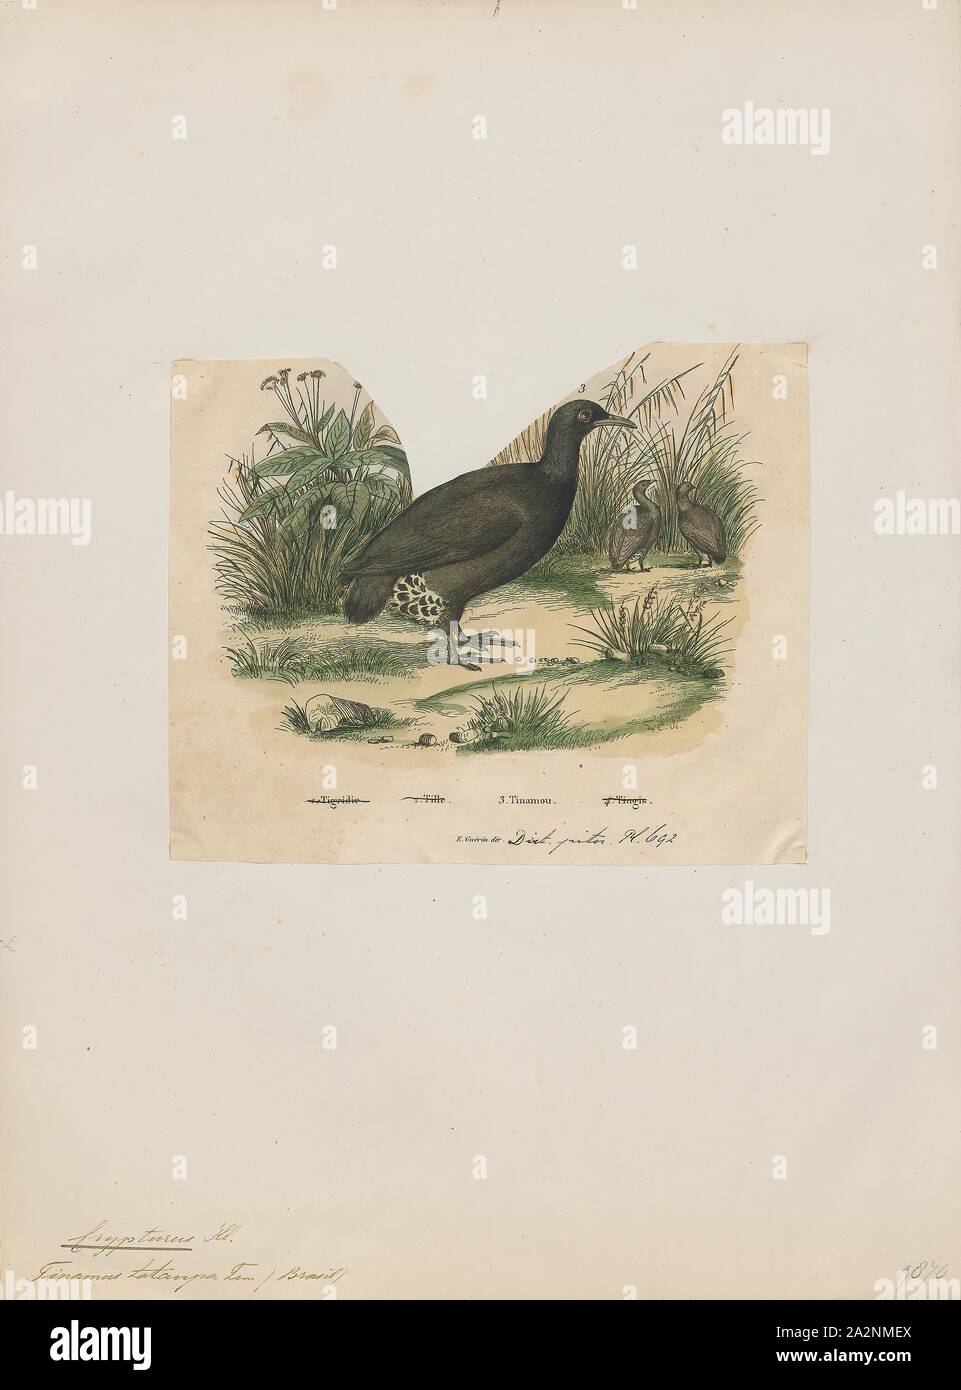 Tinamus tataupa, Print, Tinamus is a genus of birds in the tinamou family. This genus comprises some of the larger members of this South American family., 1833-1839 Stock Photo